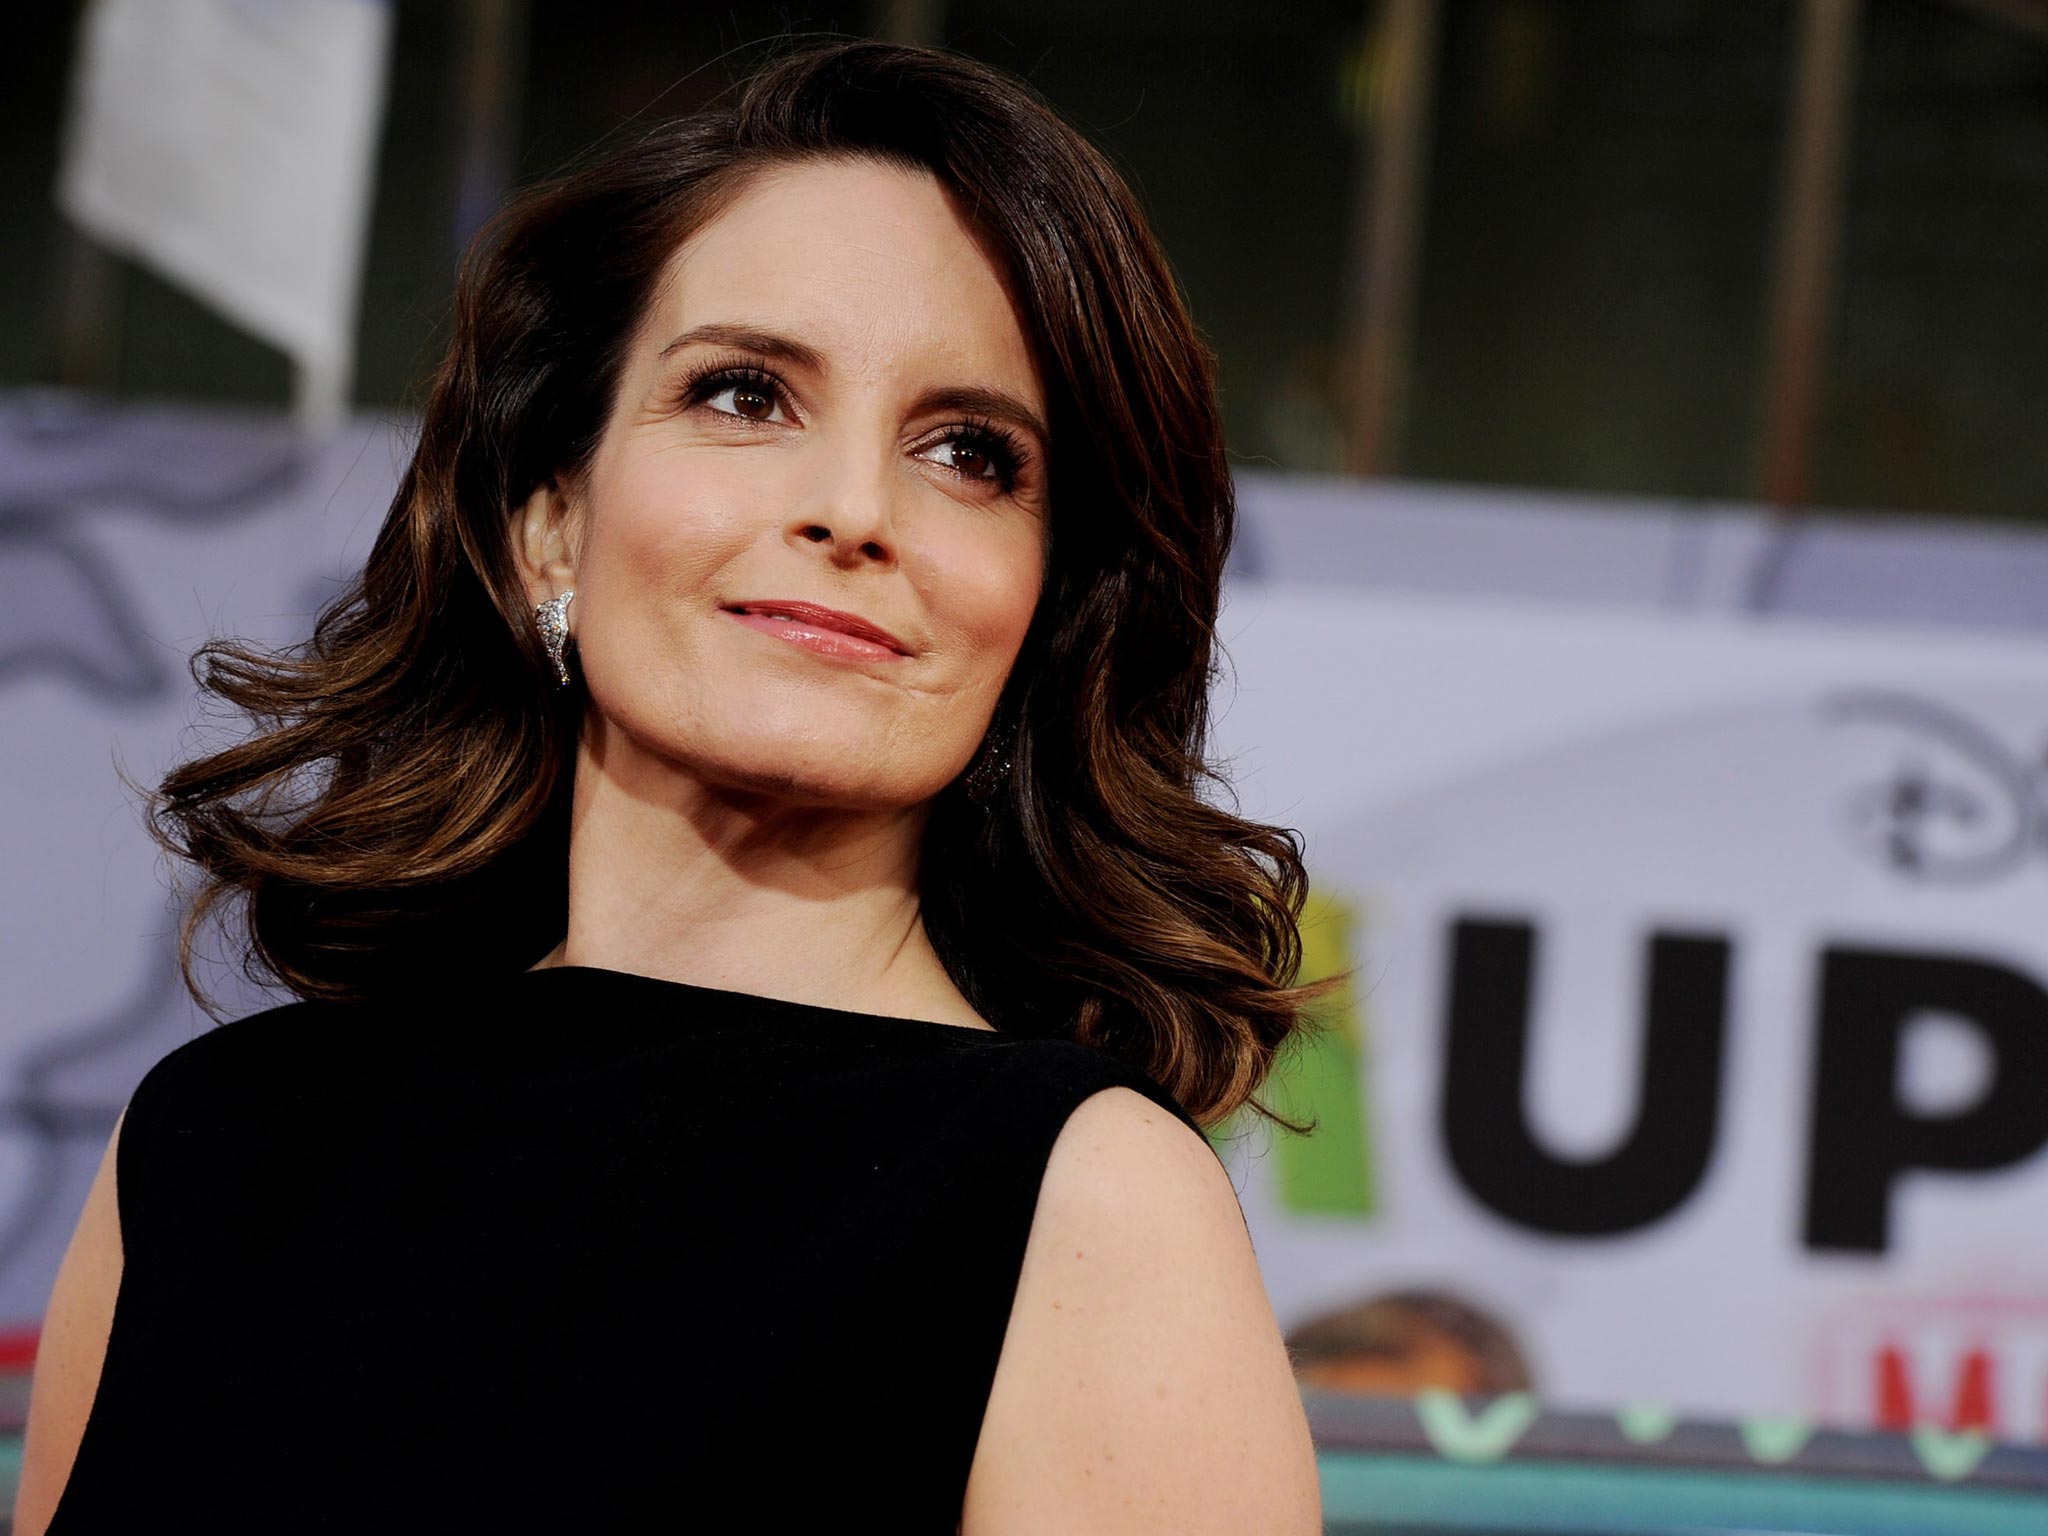 Tina Fey's next show after 30 Rock and Kimmy Schmidt has been ordered by CBS